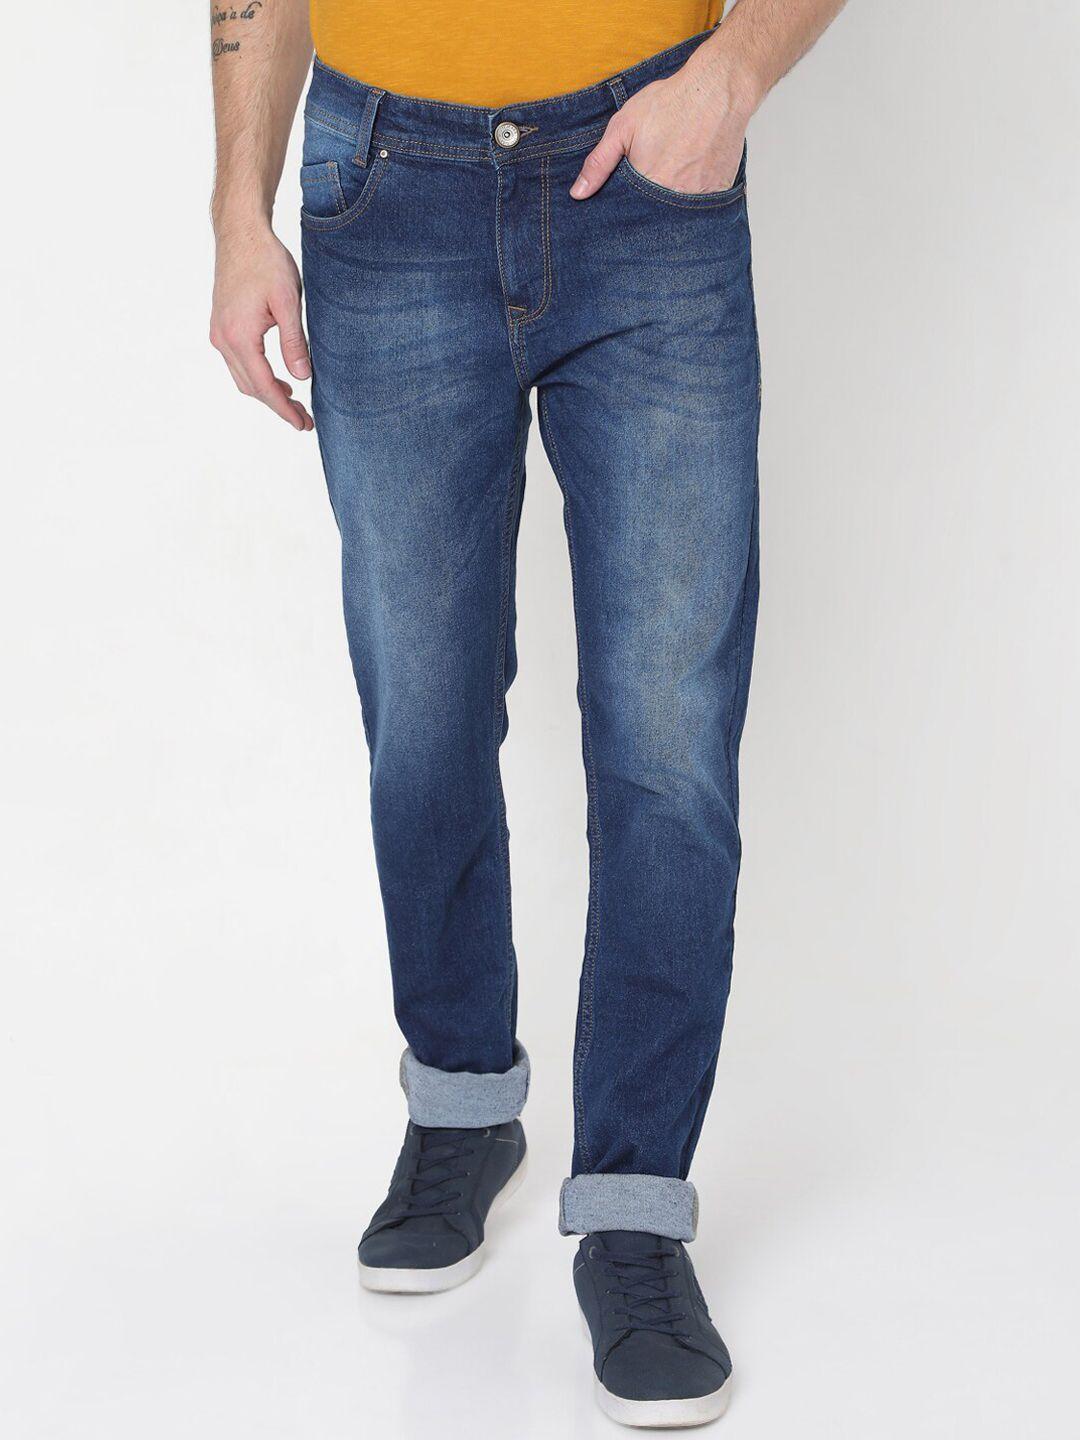 mufti-men-blue-heavy-fade-stretchable-jeans